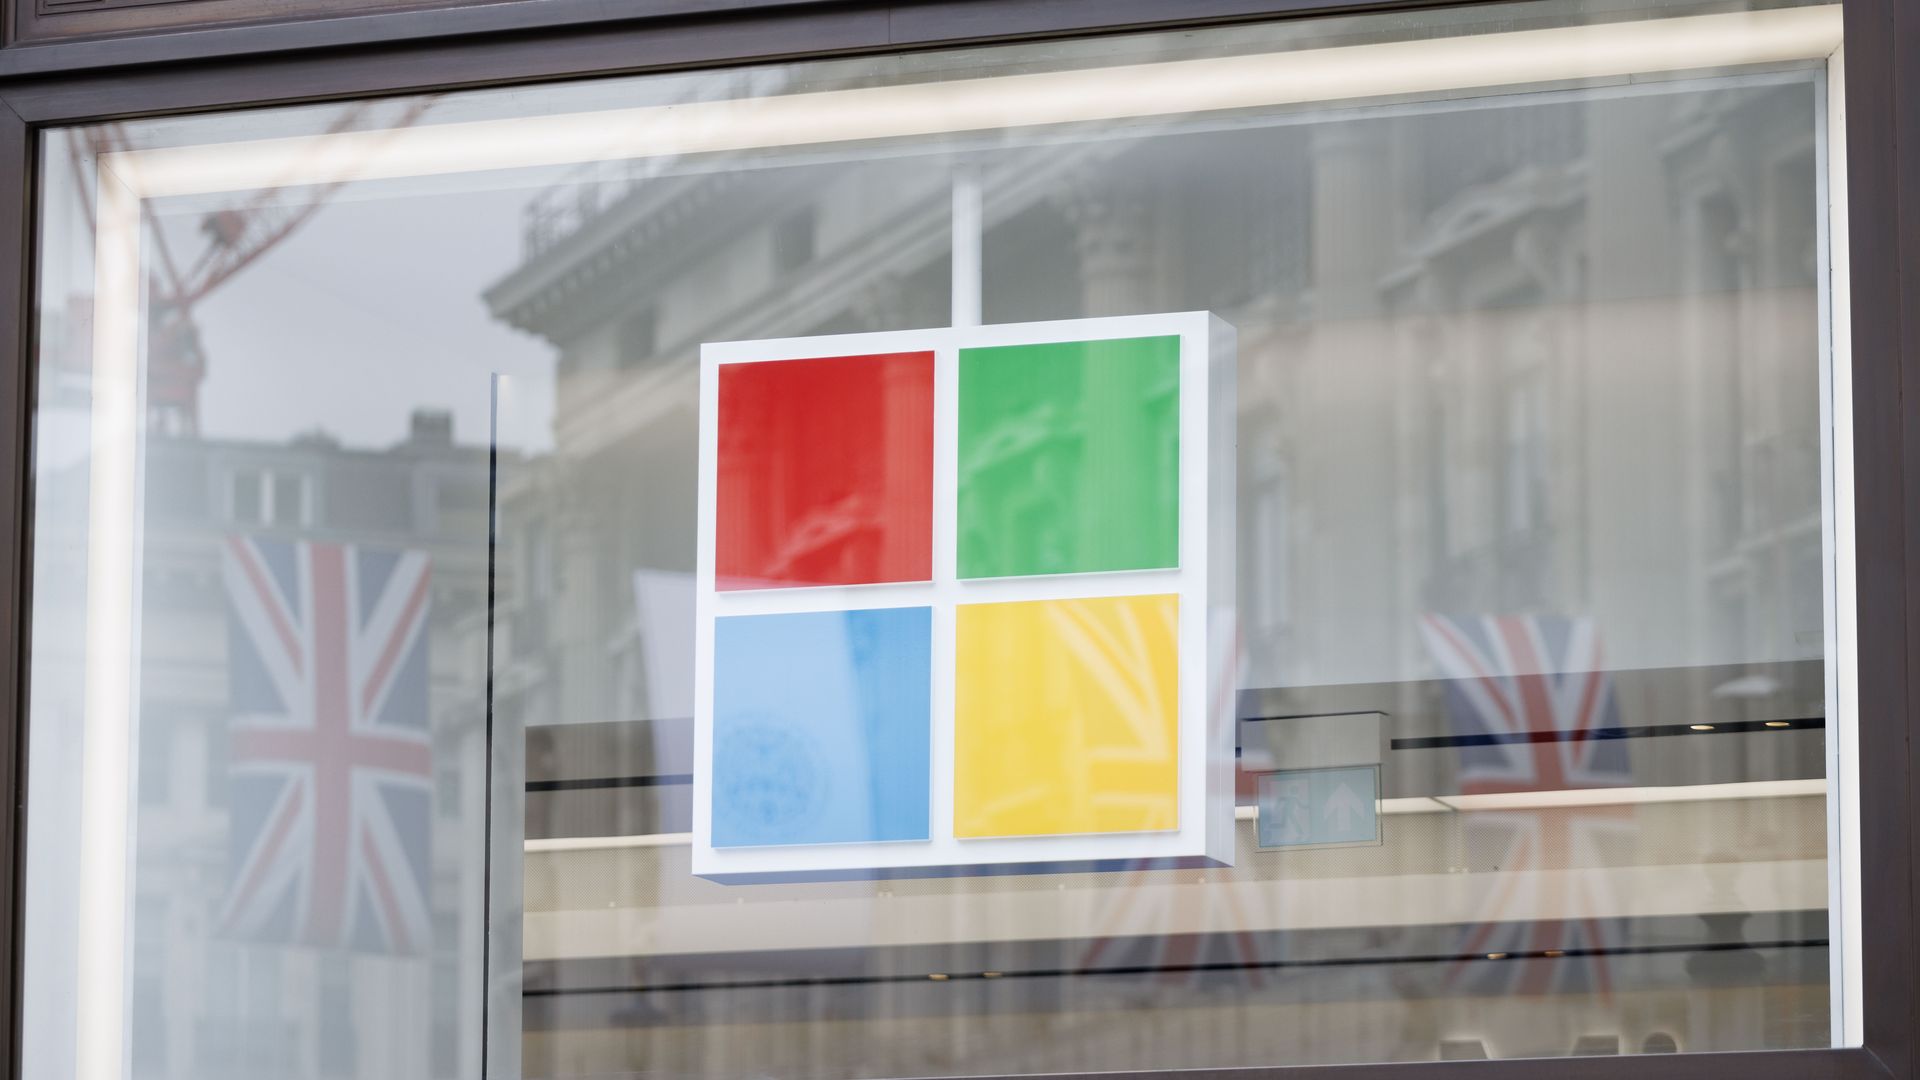 Photo of a Microsoft logo through a window with the British Union Jack visible in the window's reflection